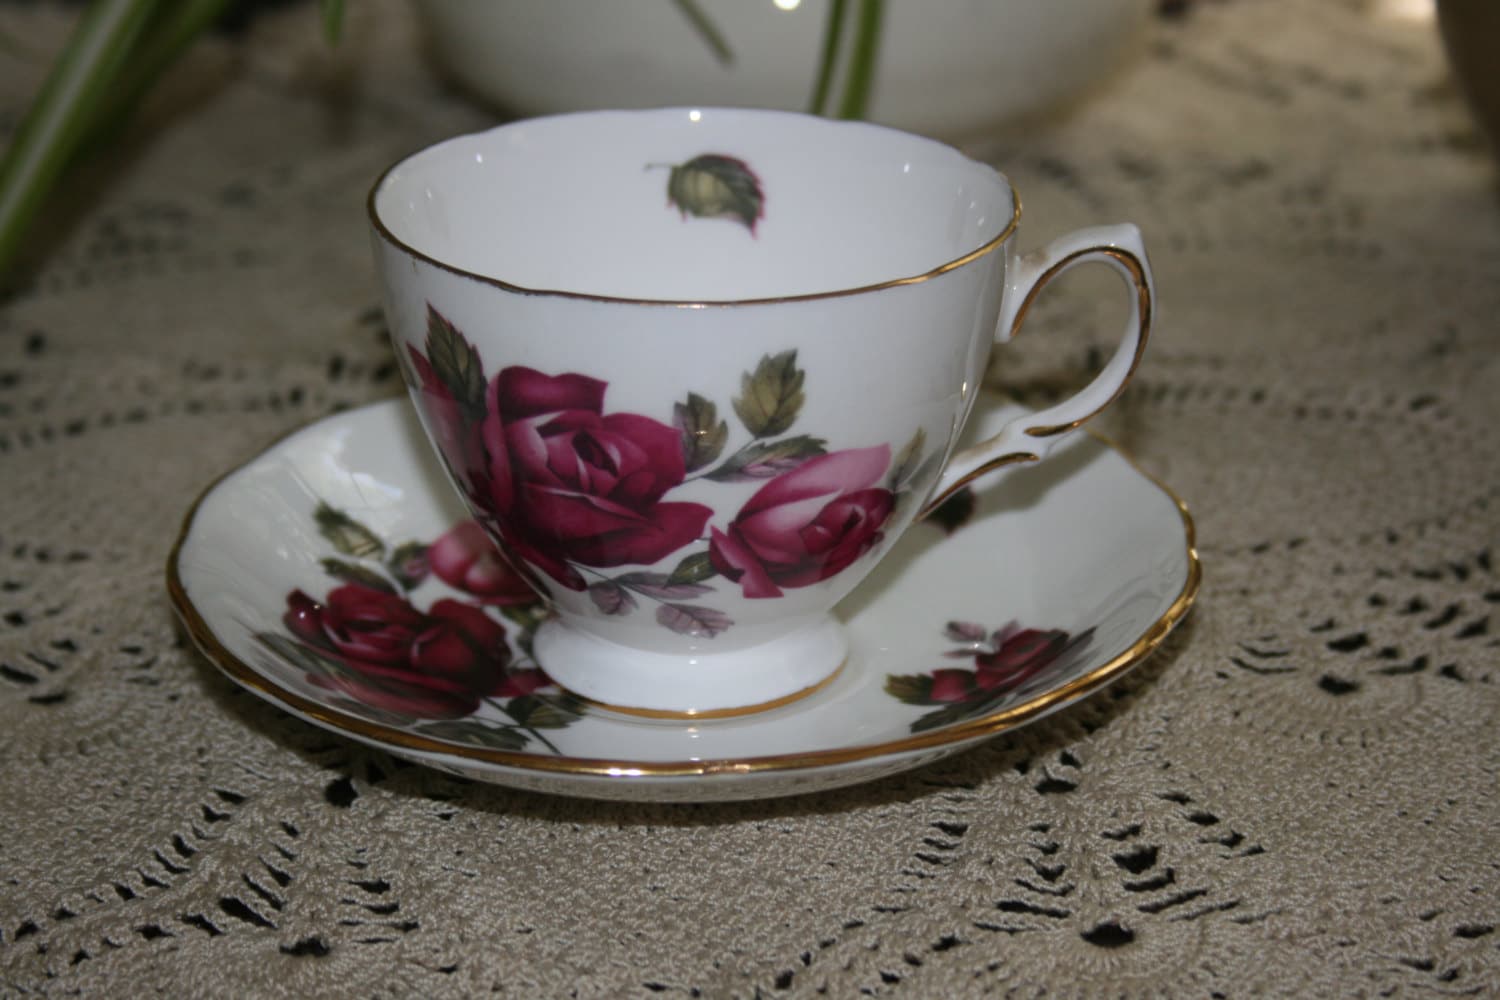 Vintage Royal Vale Bone China Red Rose Teacup and Saucer Made in England  8171